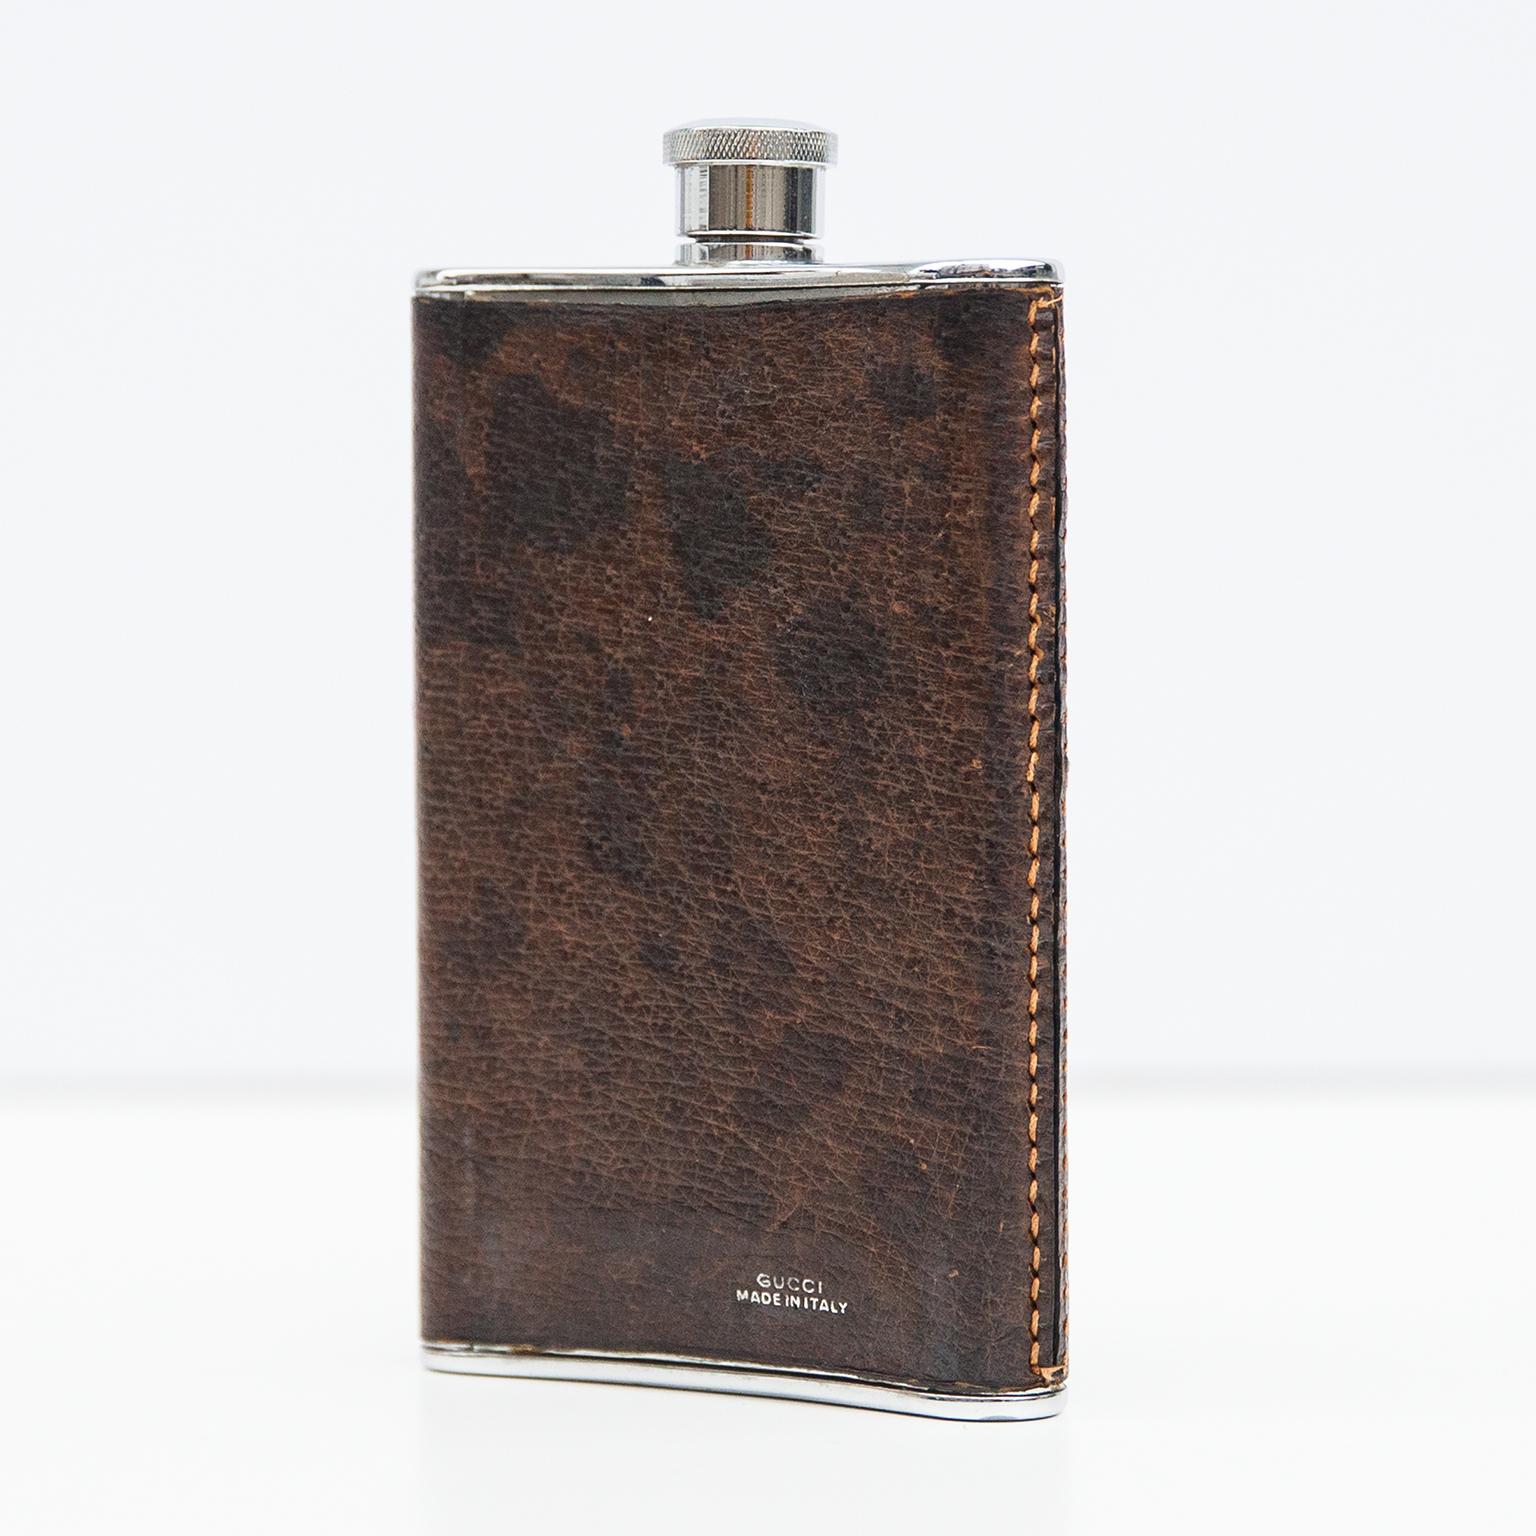 Silver plated hip flask designed in leather and engraved Gucci on the bottom.